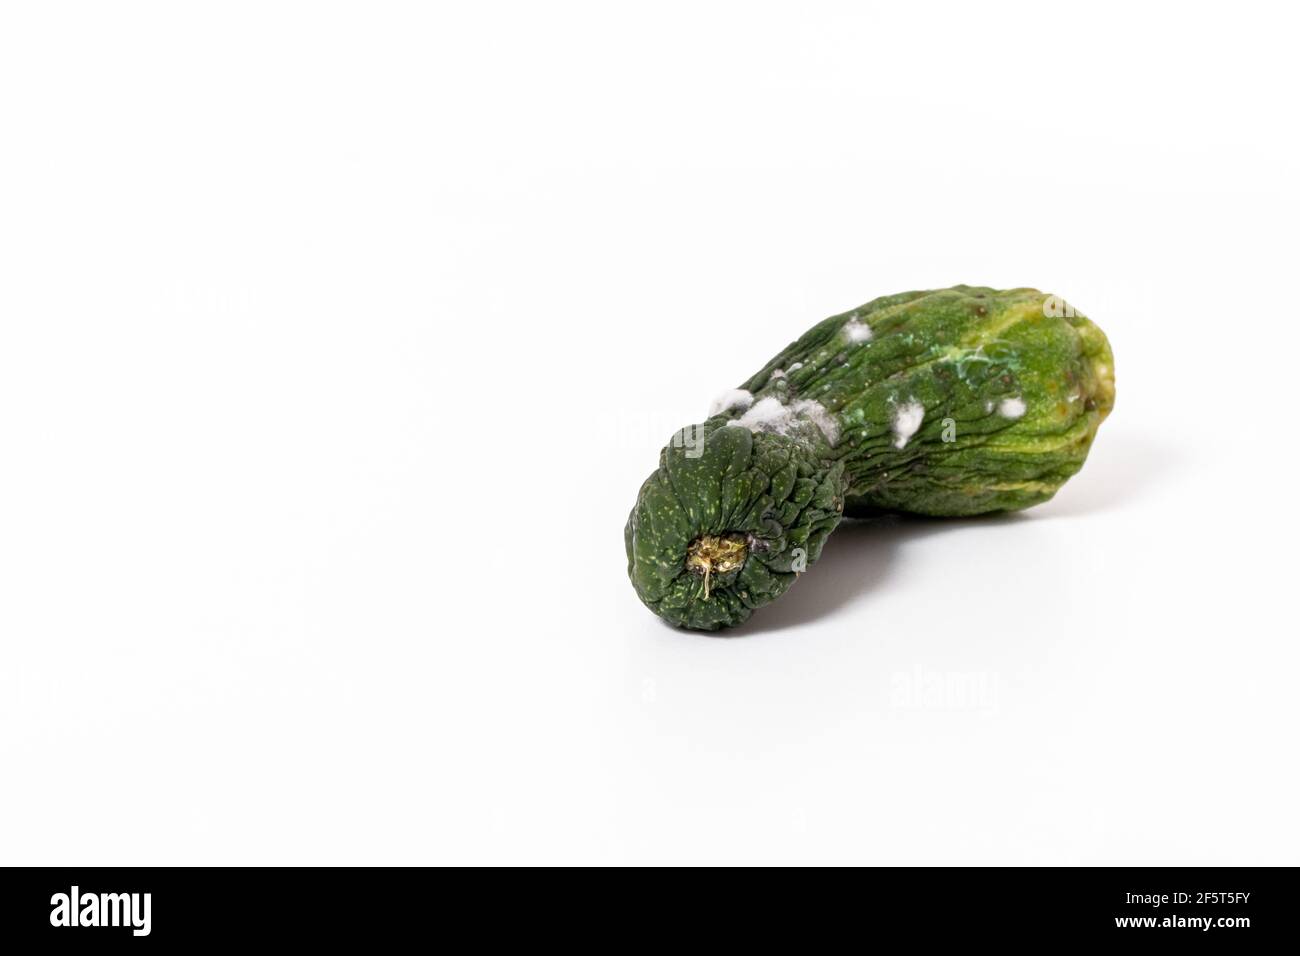 Spoiled cucumber covered with mold isolated on white background Stock Photo